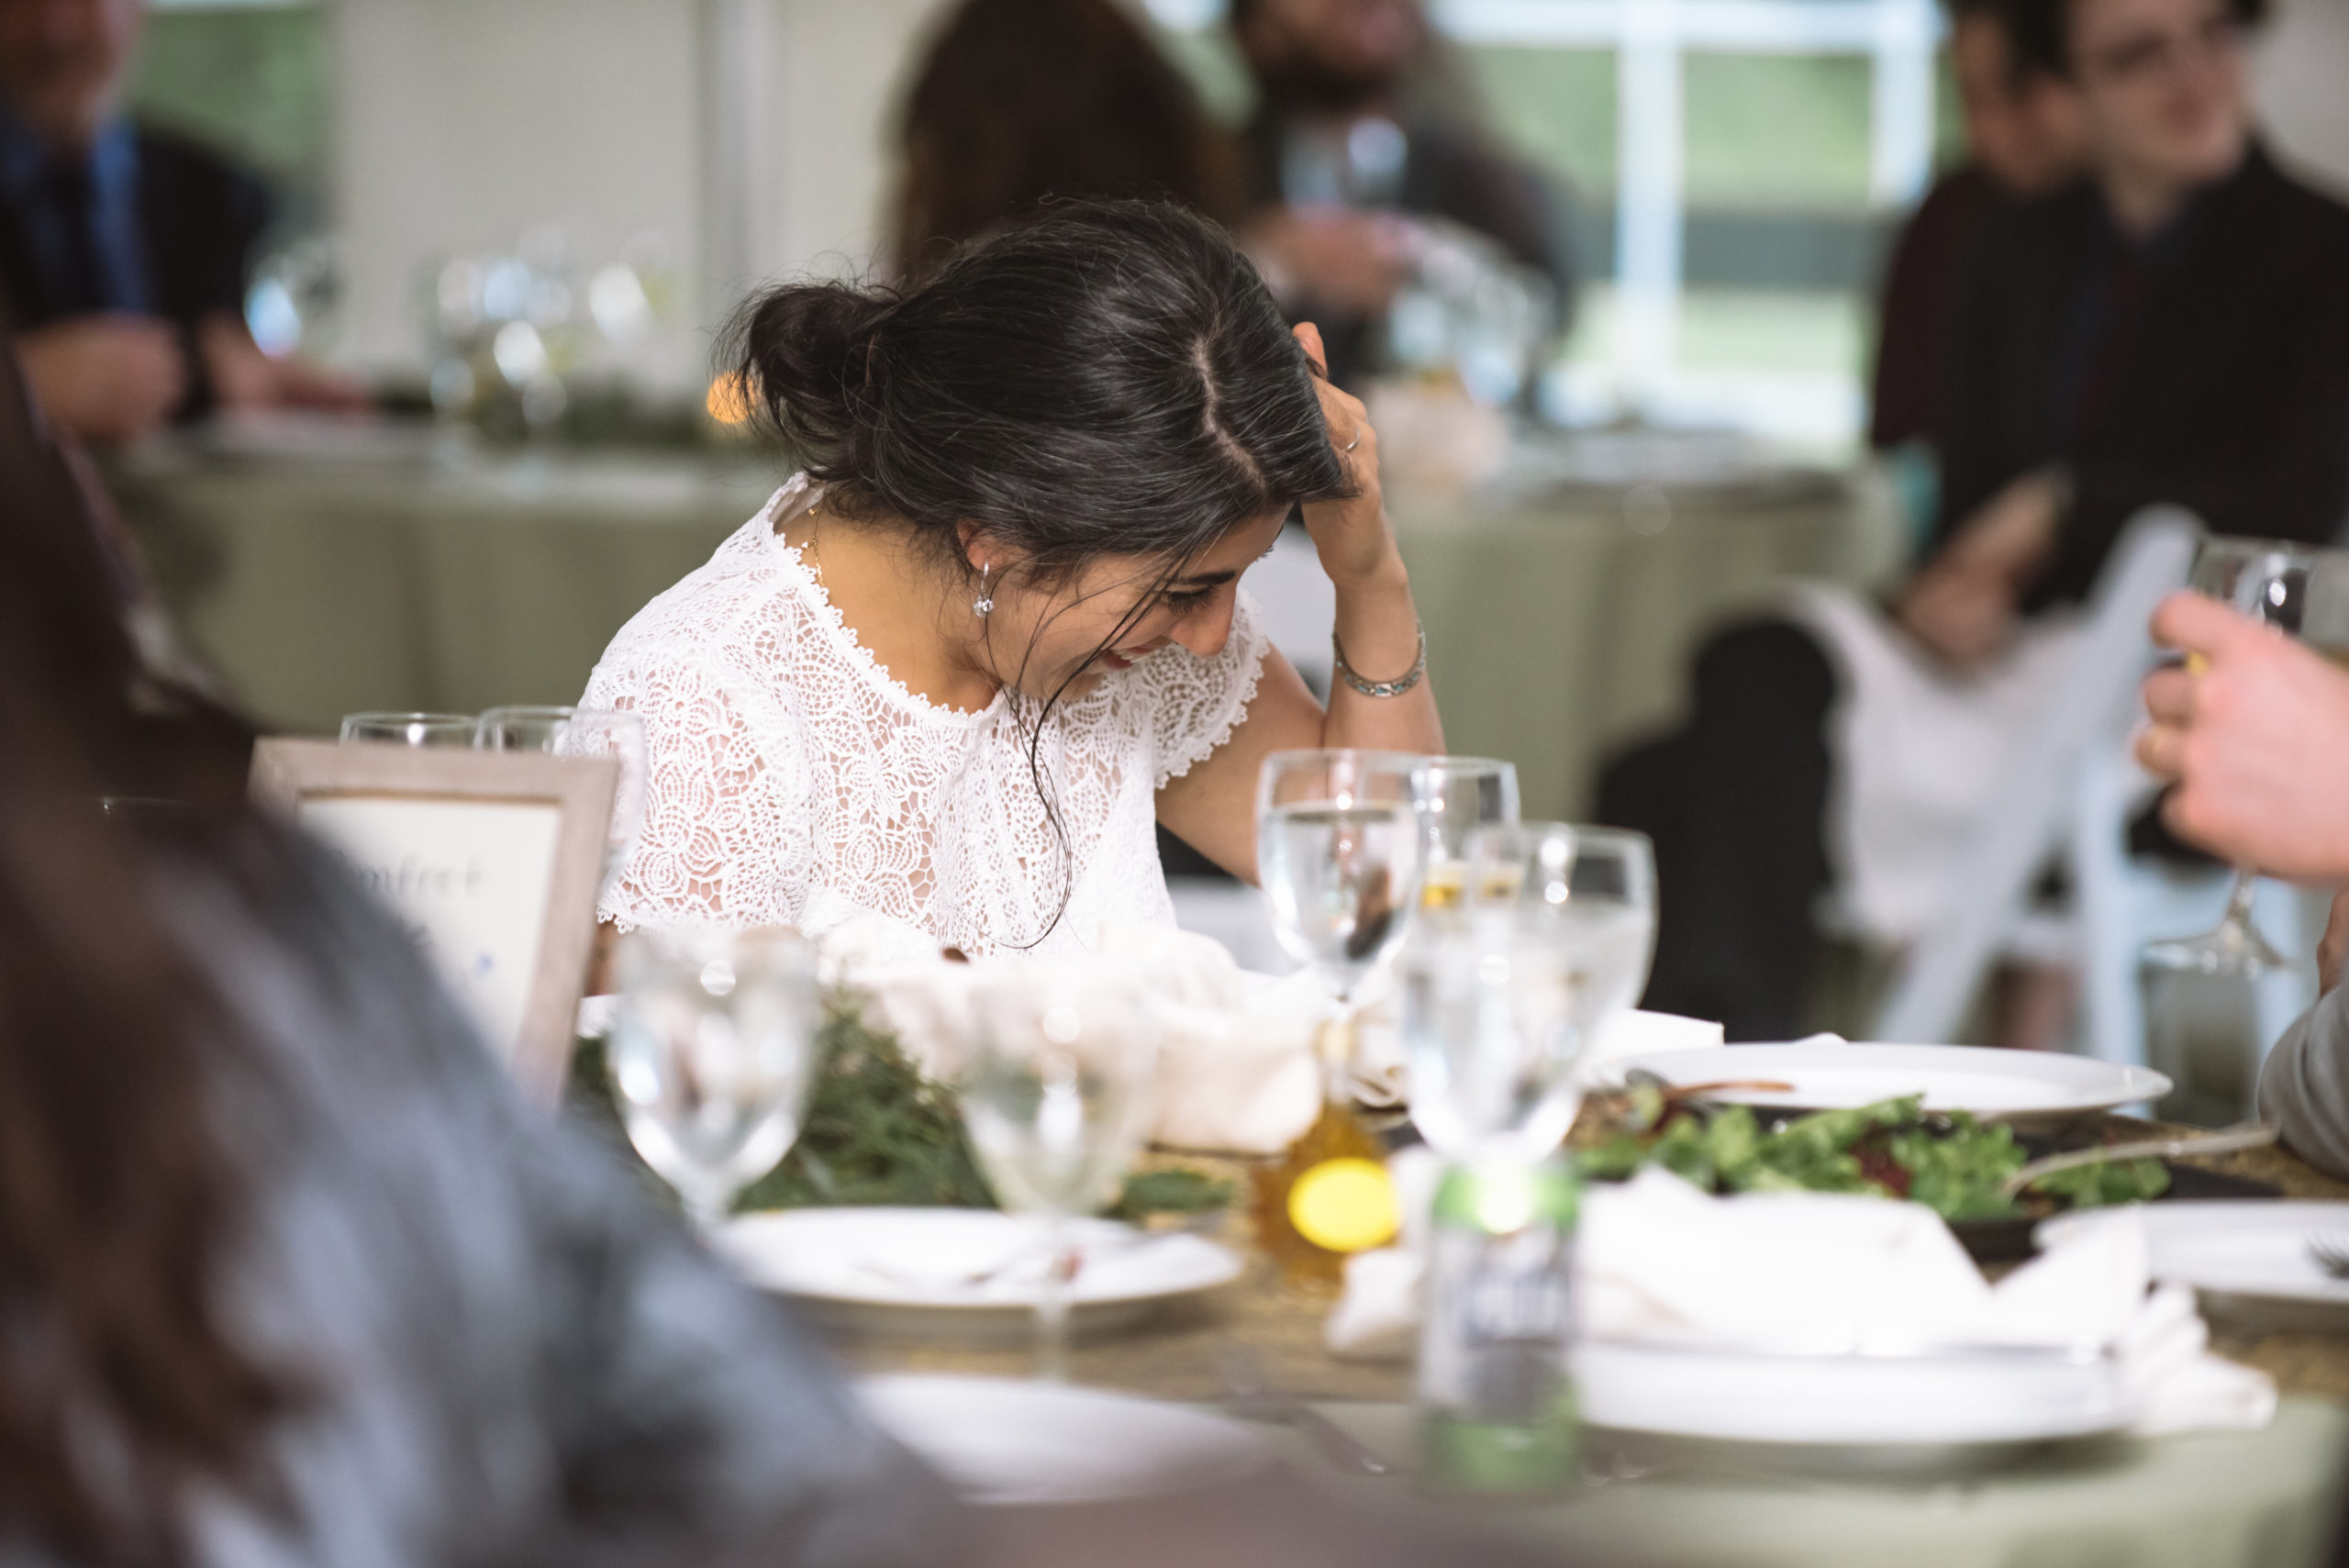 Bride hearing a speech during the white tent reception. She is laughing while looking down toward her lap and touching her hair. There are guests all around in the foreground and background.